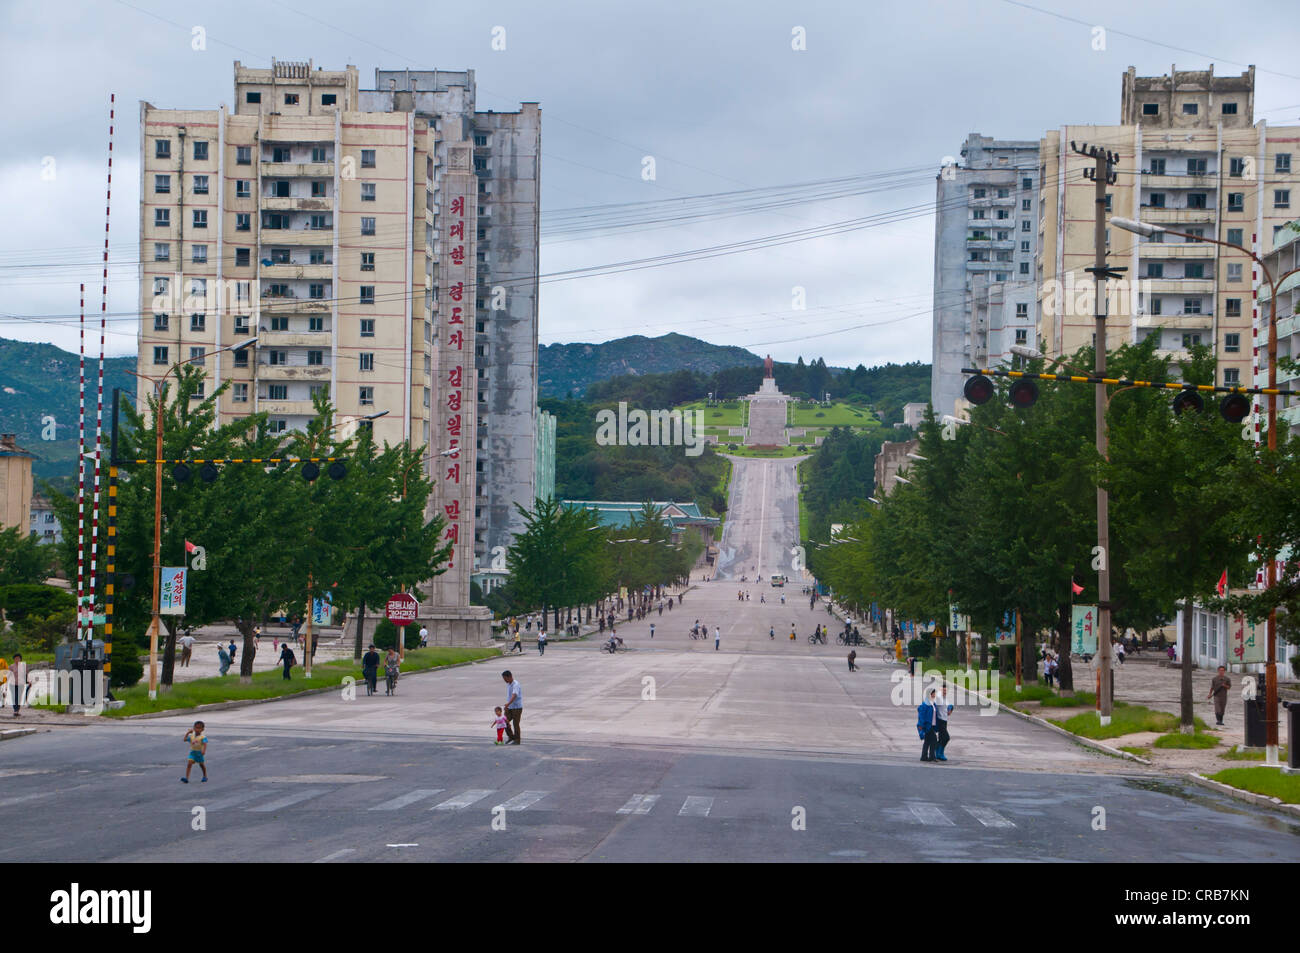 Car-free streets and communist residential buildings in Kaesong, North Korea, Asia Stock Photo